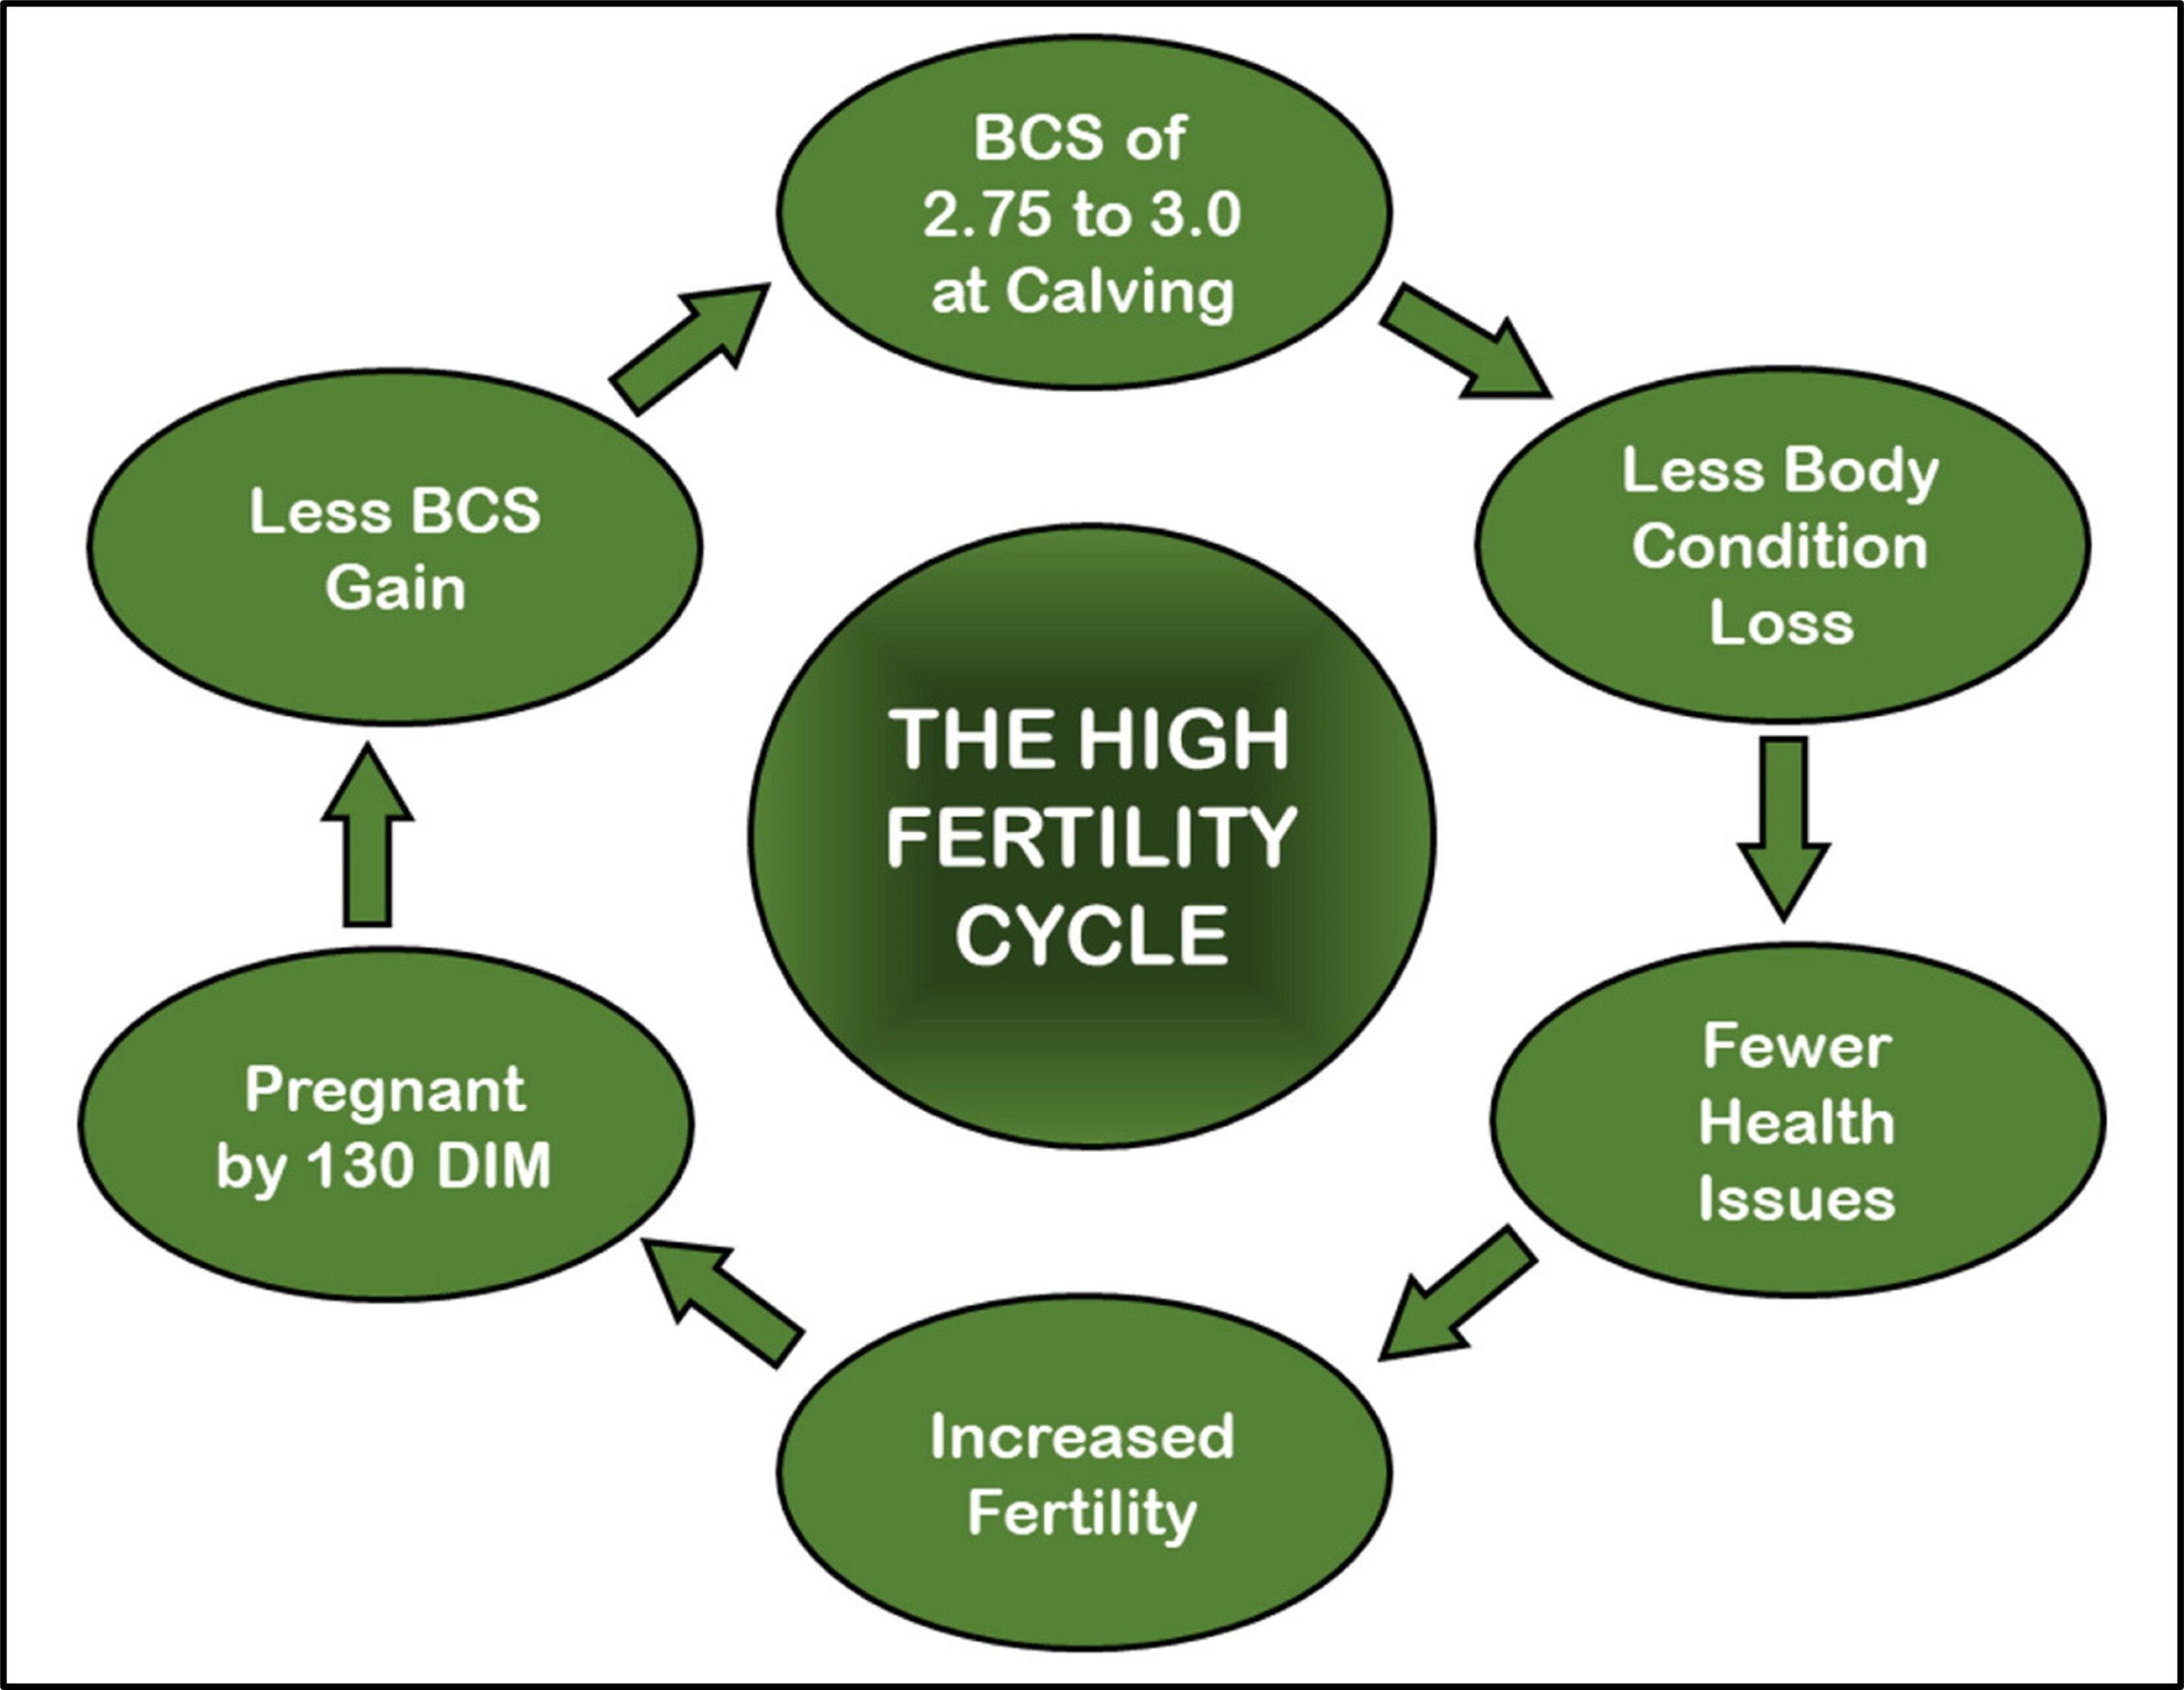 Efficient Measures for Managing High Fertility Cycles in Dairy Herds